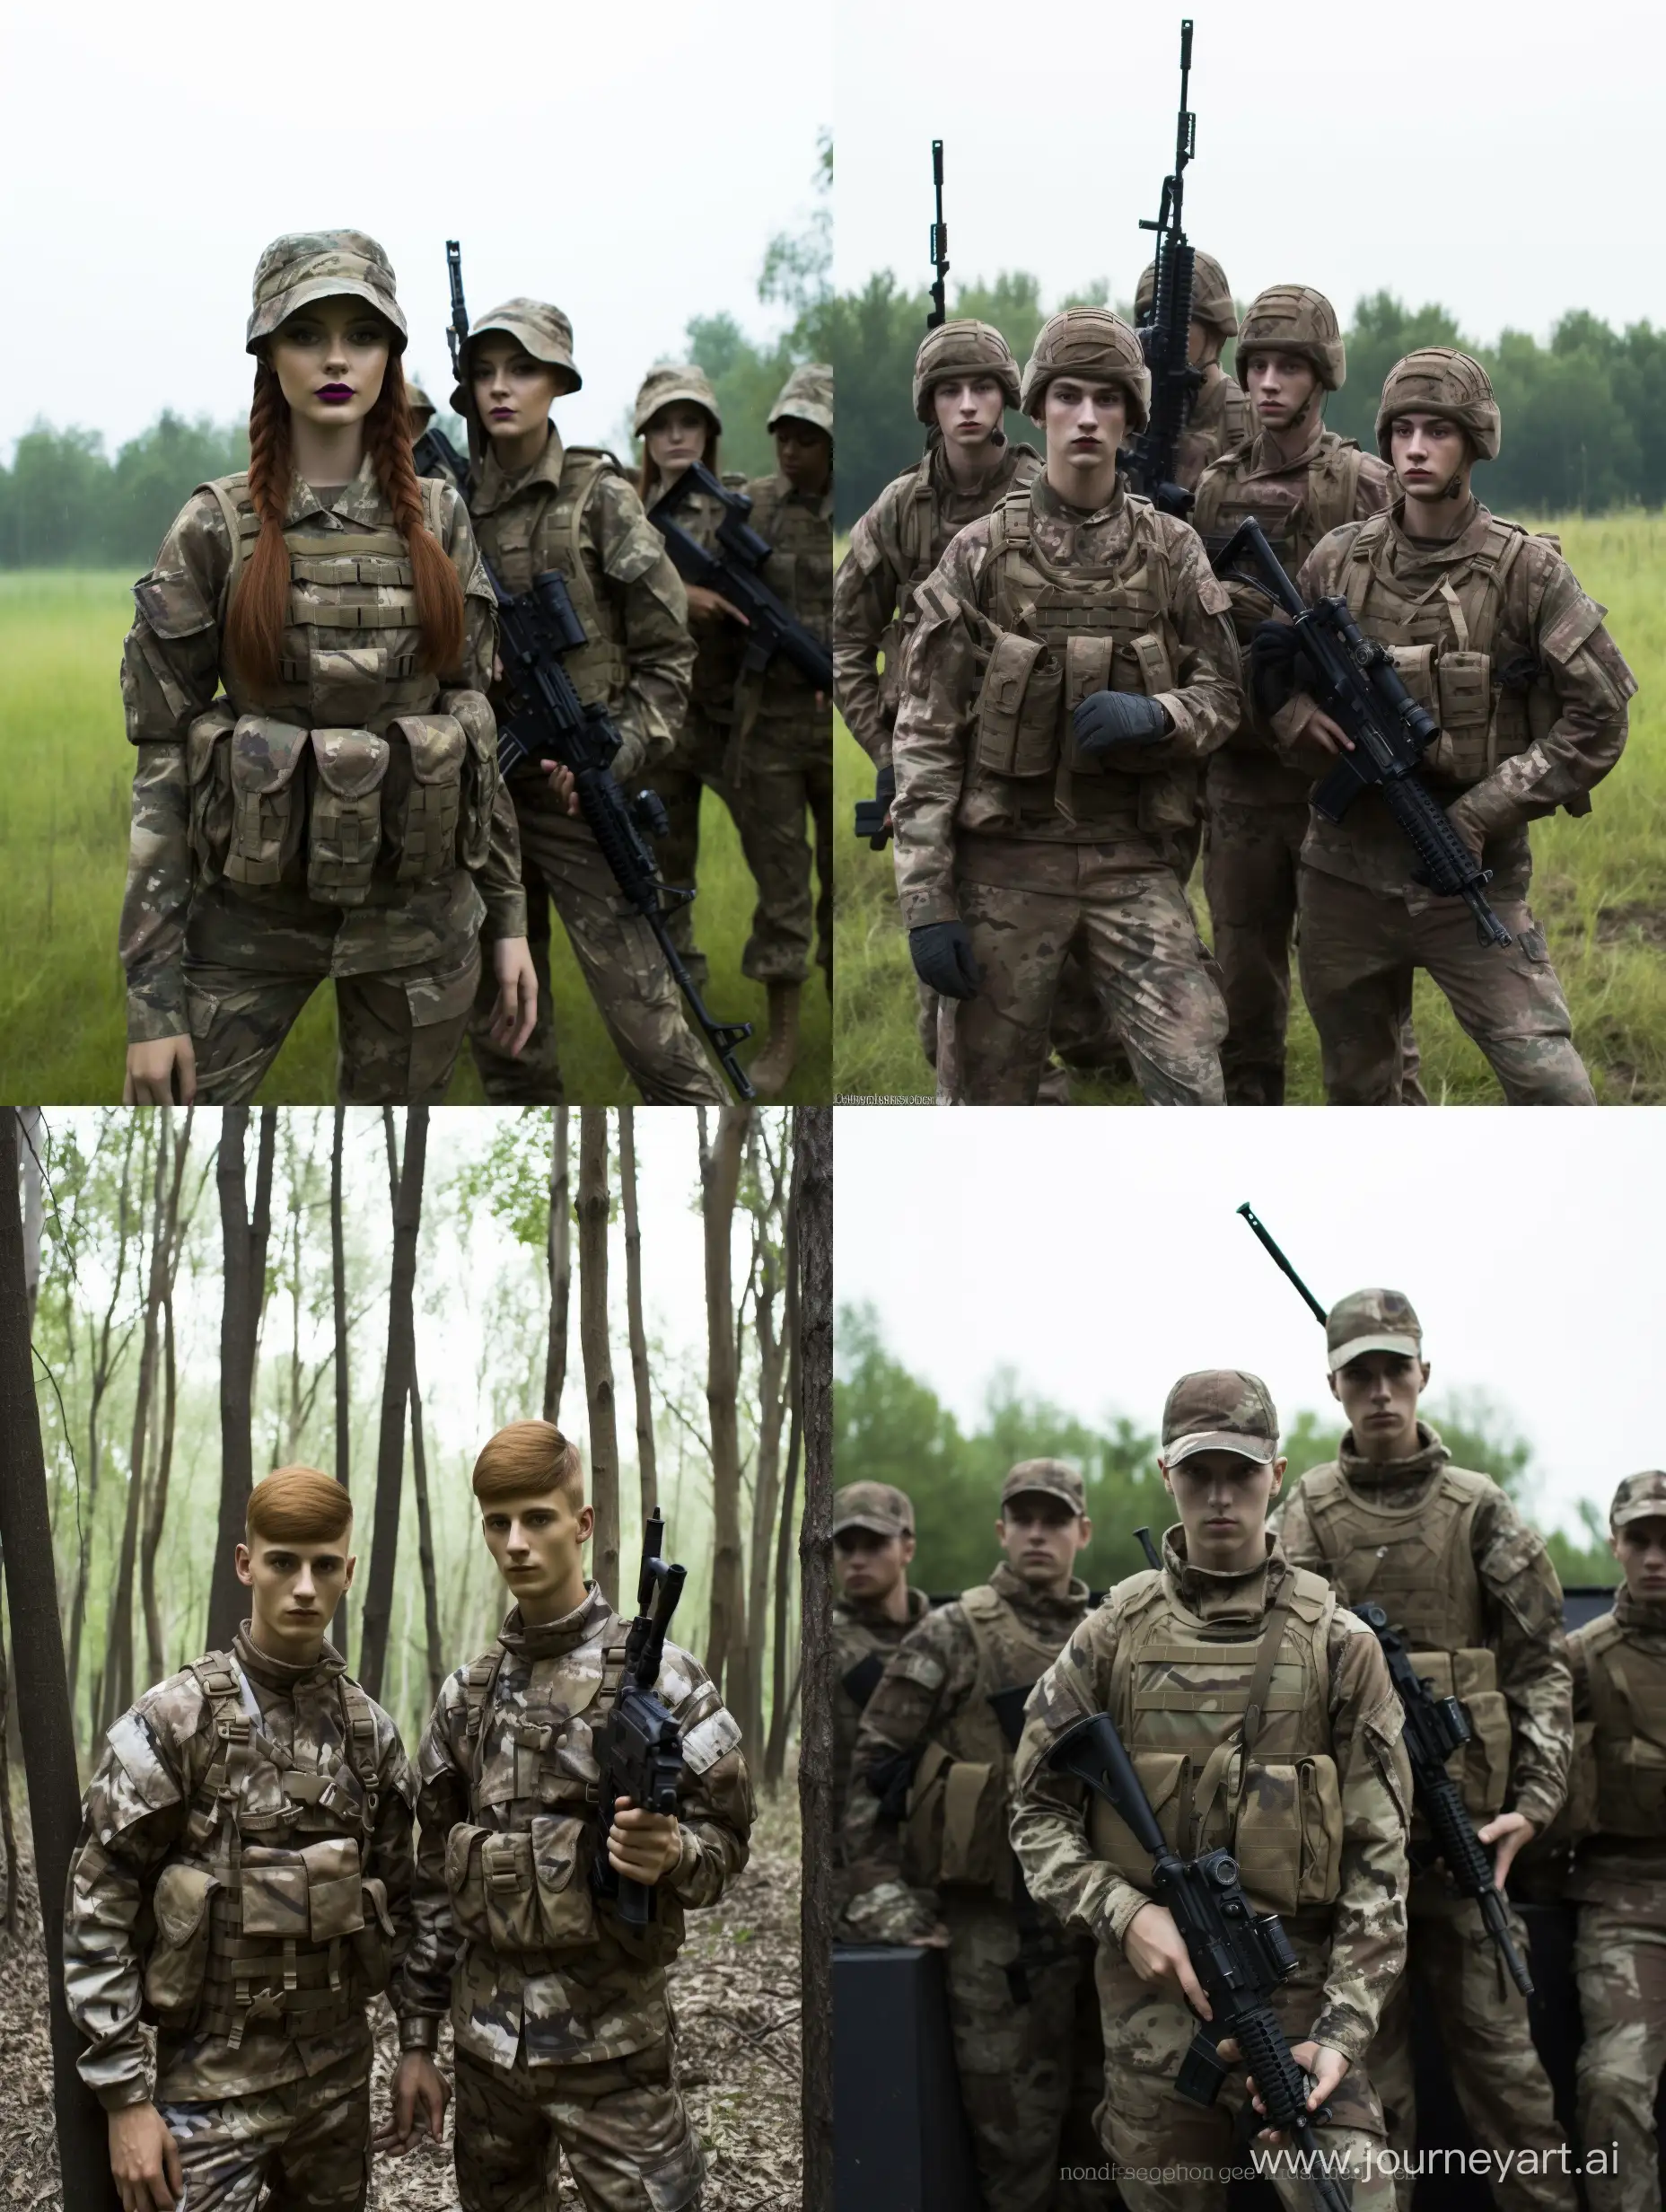 Photo selfie Image of a group of 11 Ukrainian heavy equipped male and female teens soliders recruits with helmet and camo battlesuit, showing their sense of humor, photography, male and female, with other soldiers in the background, 3.16mm, f/2.4, ISO: 117, Exposure time: 1/60s